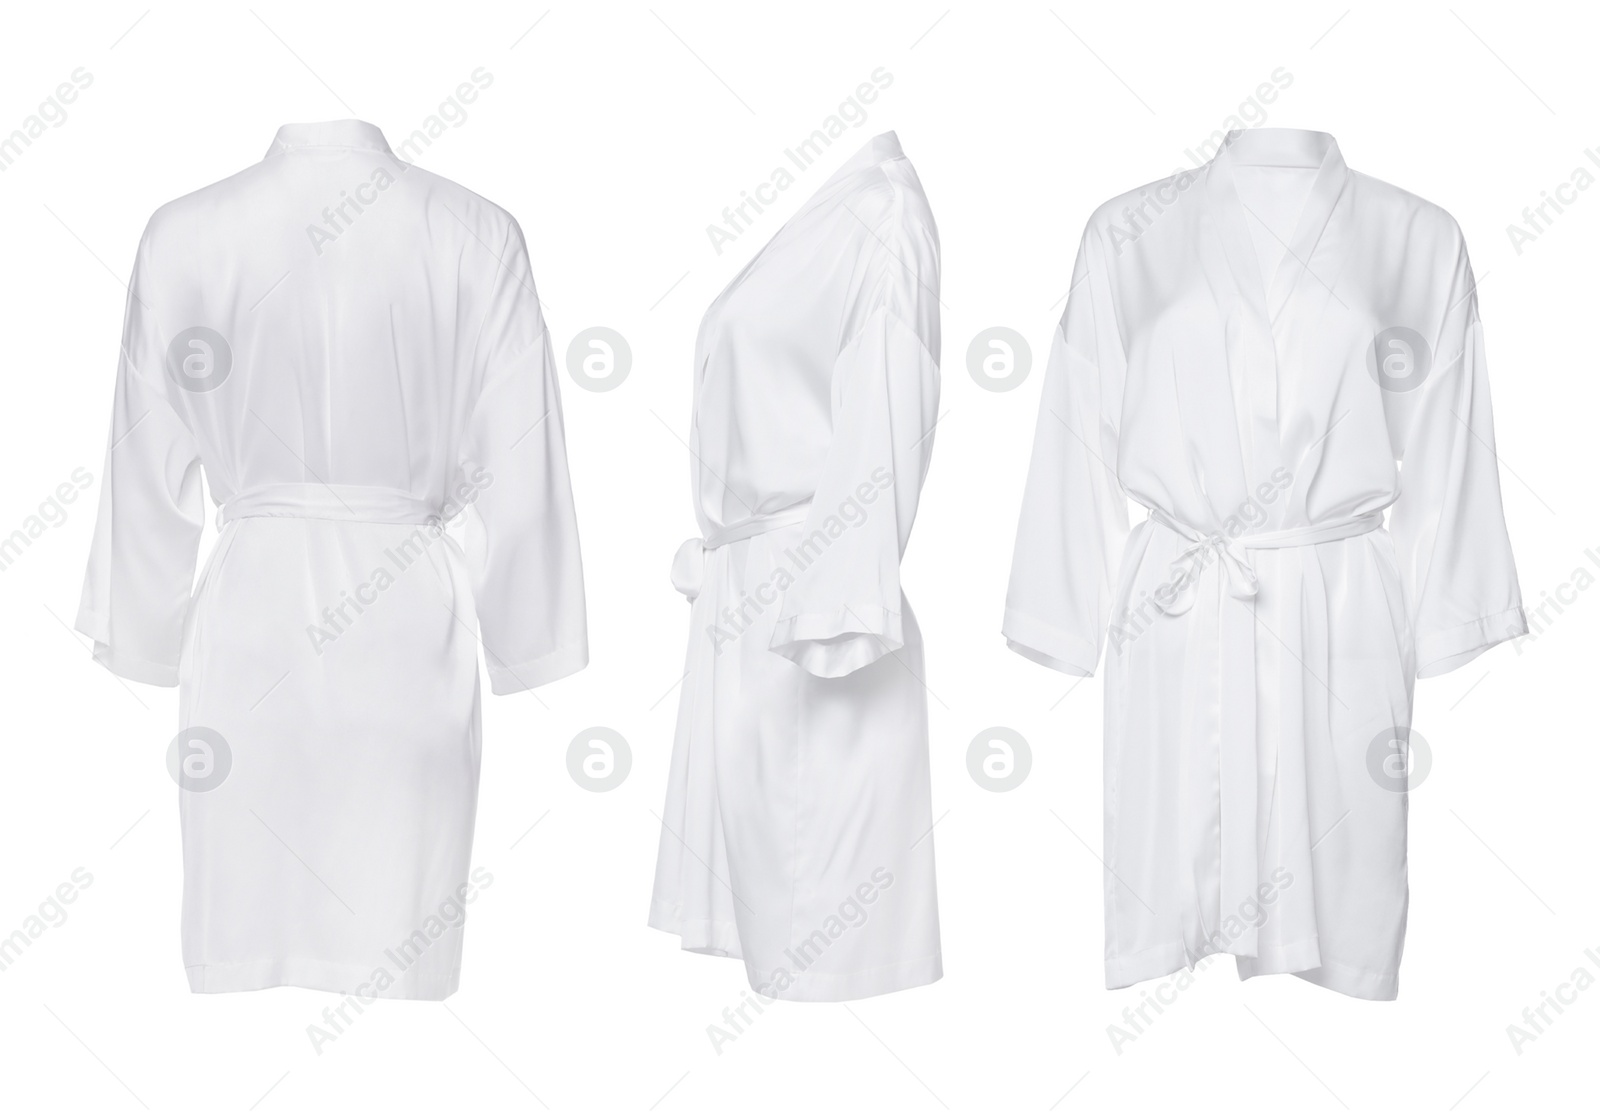 Image of Collage with clean silk bathrobe on white background, different views